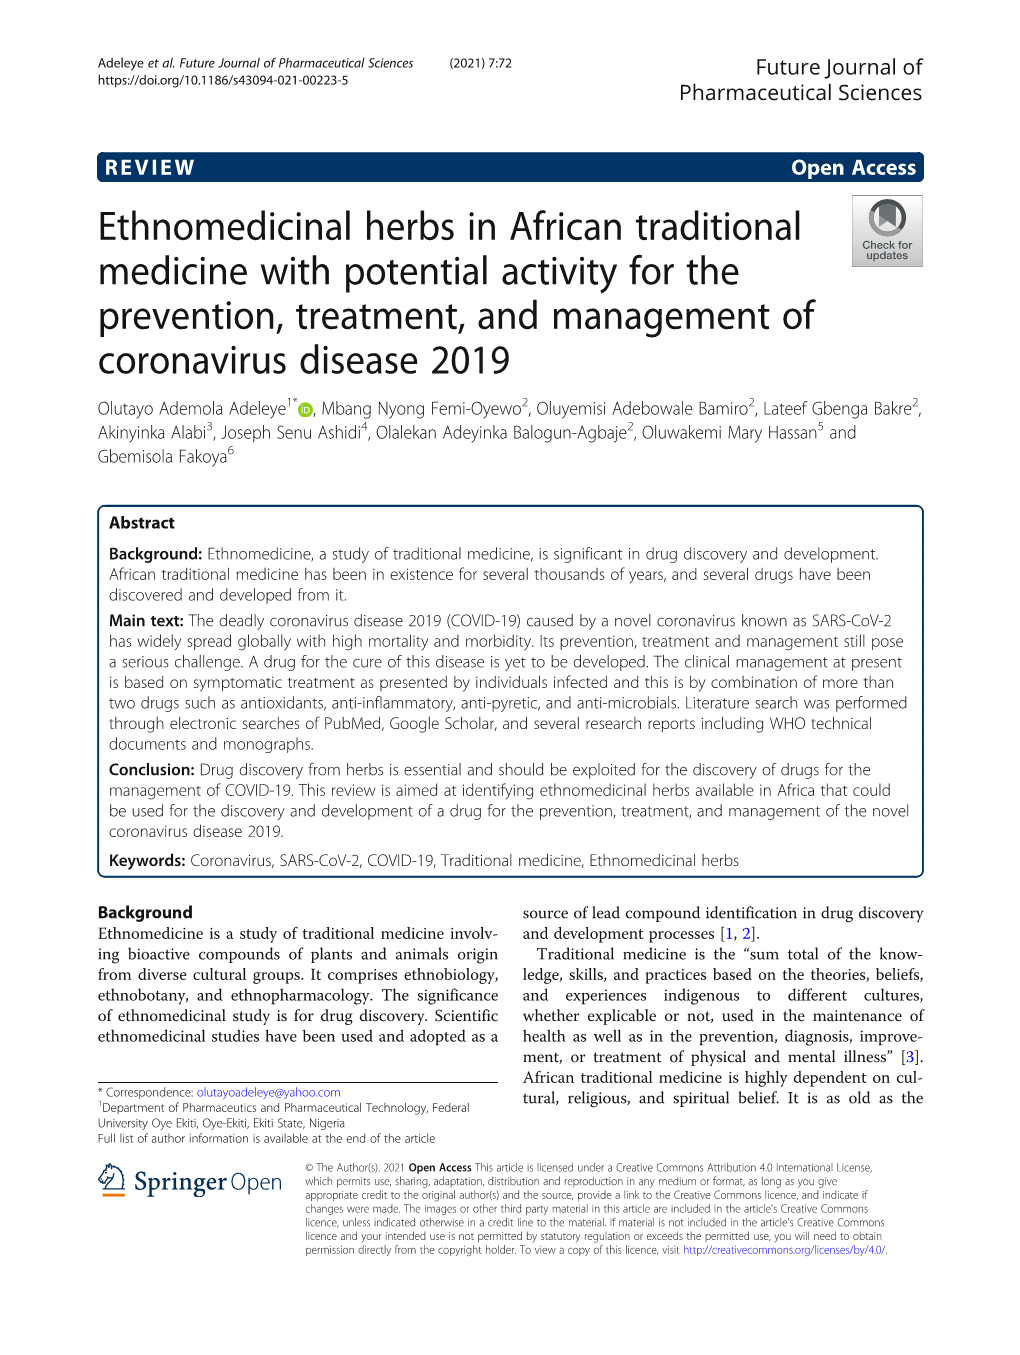 Ethnomedicinal Herbs in African Traditional Medicine with Potential